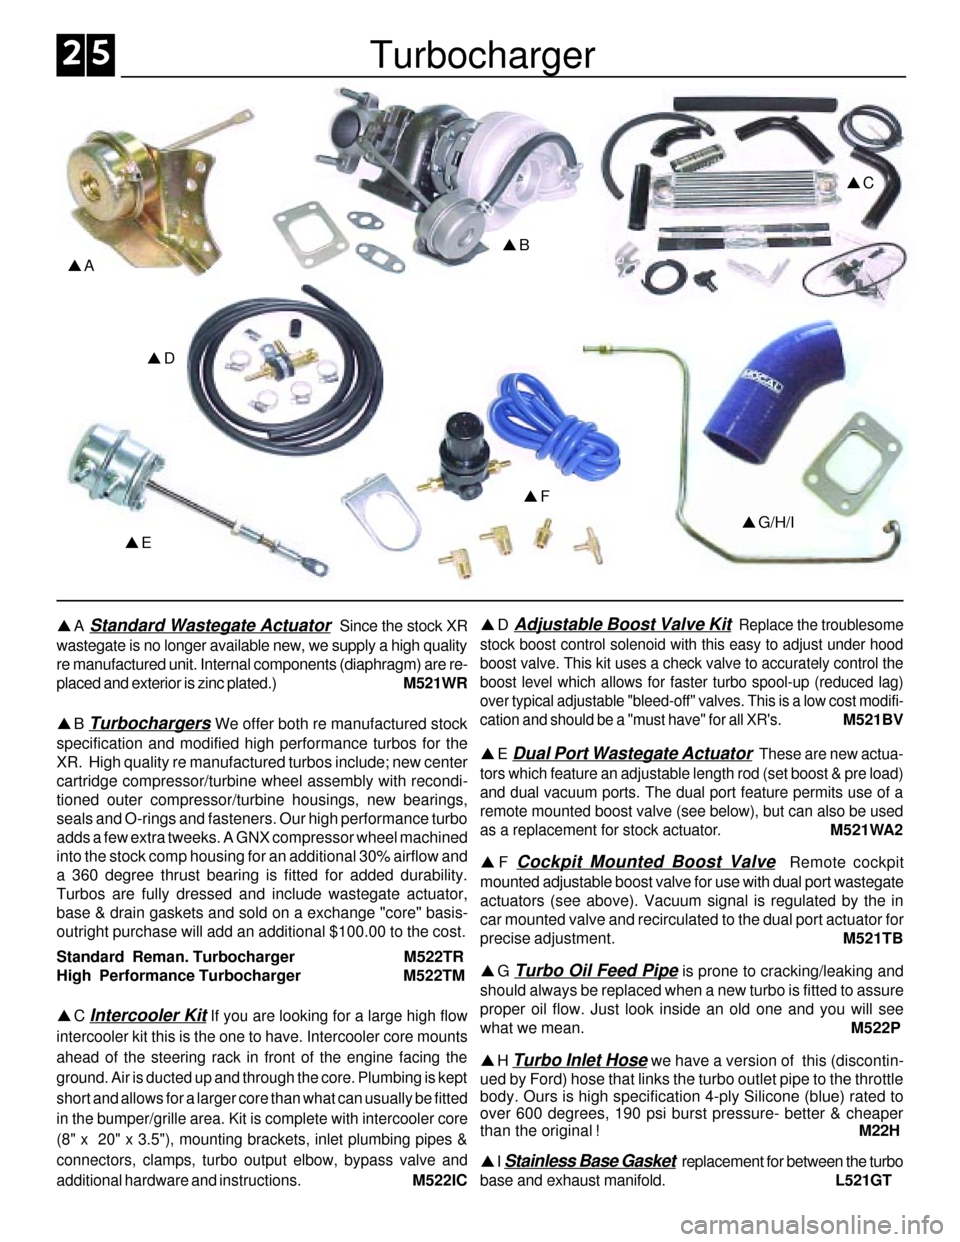 FORD SIERRA 1985 1.G XR4 Owners Manual Turbocharger
pC
pG/H/I
pF
pD
pA
pB
pE
pA Standard Wastegate Actuator  Since the stock XR
wastegate is no longer available new, we supply a high quality
re manufactured unit. Internal components (diaph